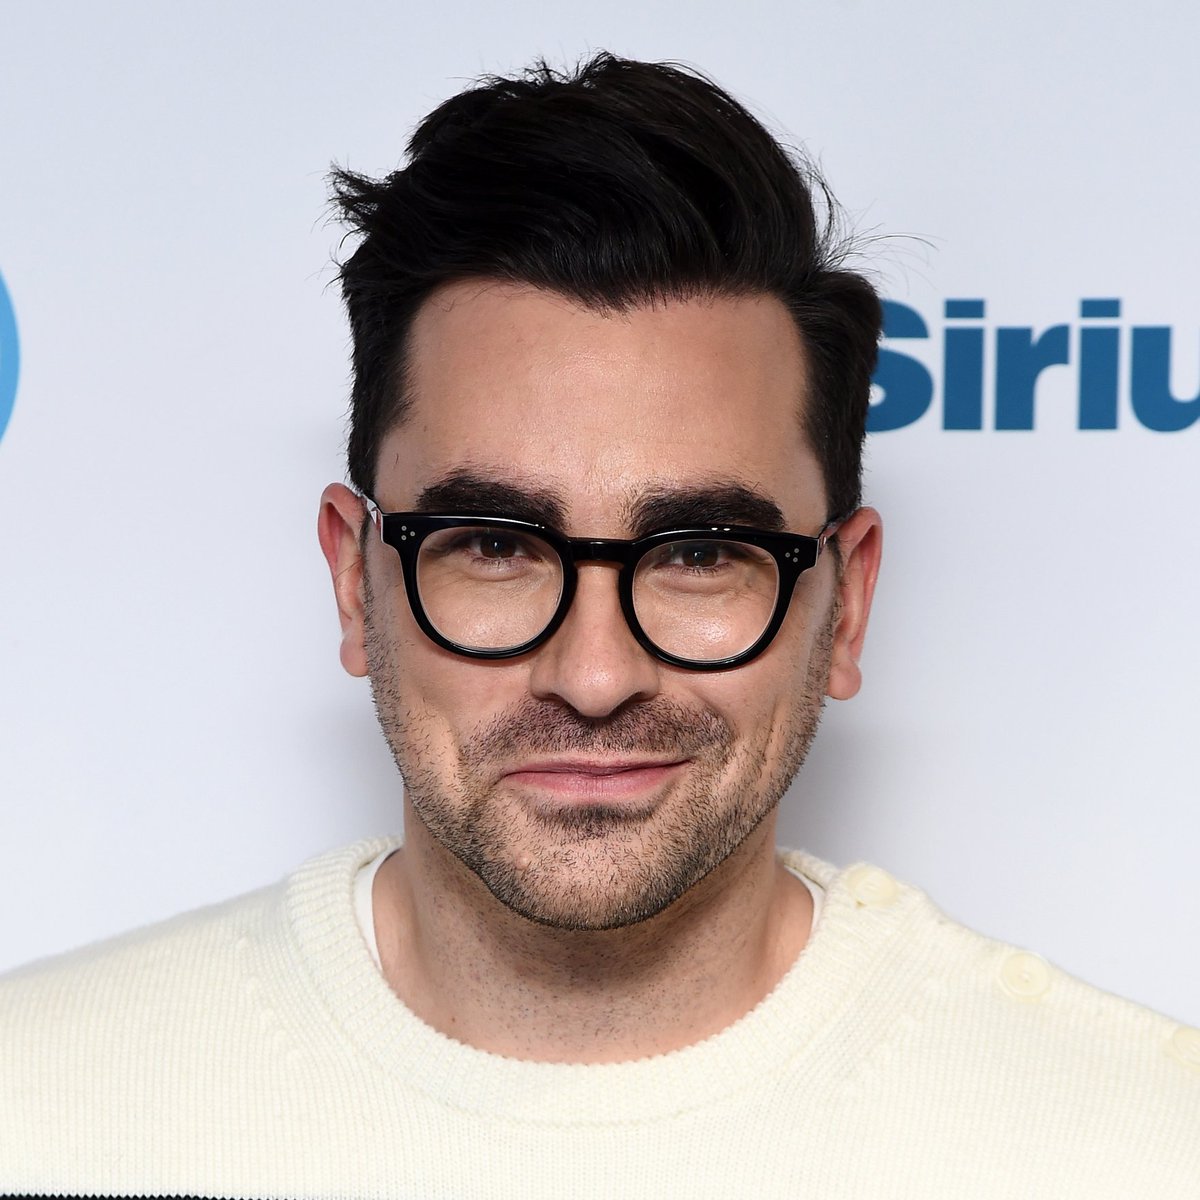 Dan Levy, but each time his smile gets a little bigger